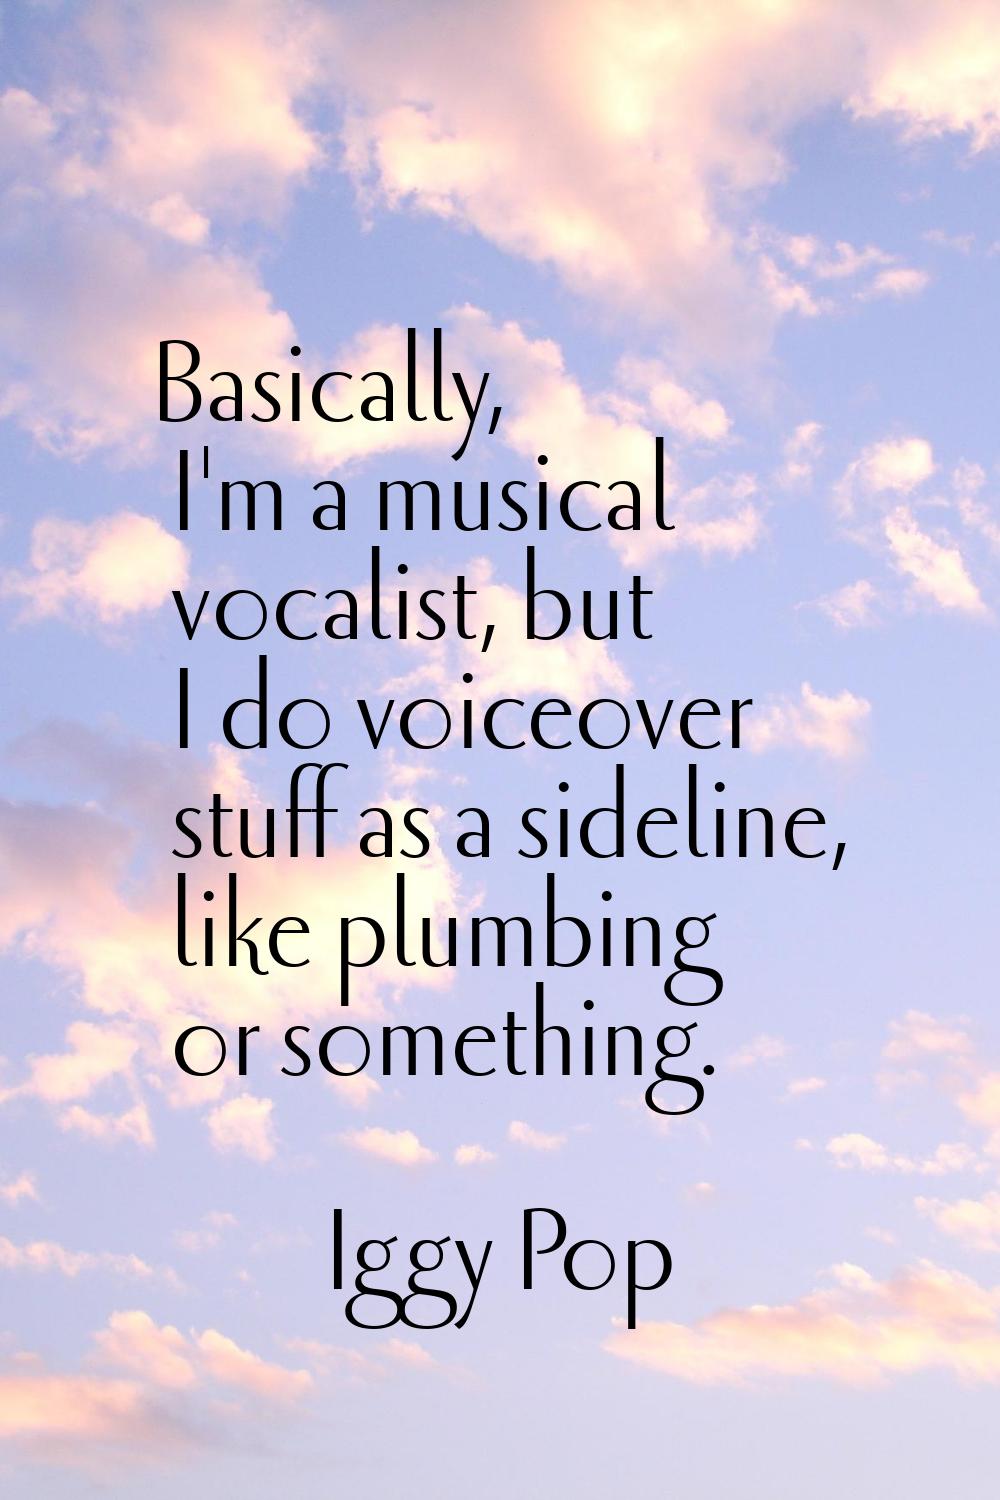 Basically, I'm a musical vocalist, but I do voiceover stuff as a sideline, like plumbing or somethi